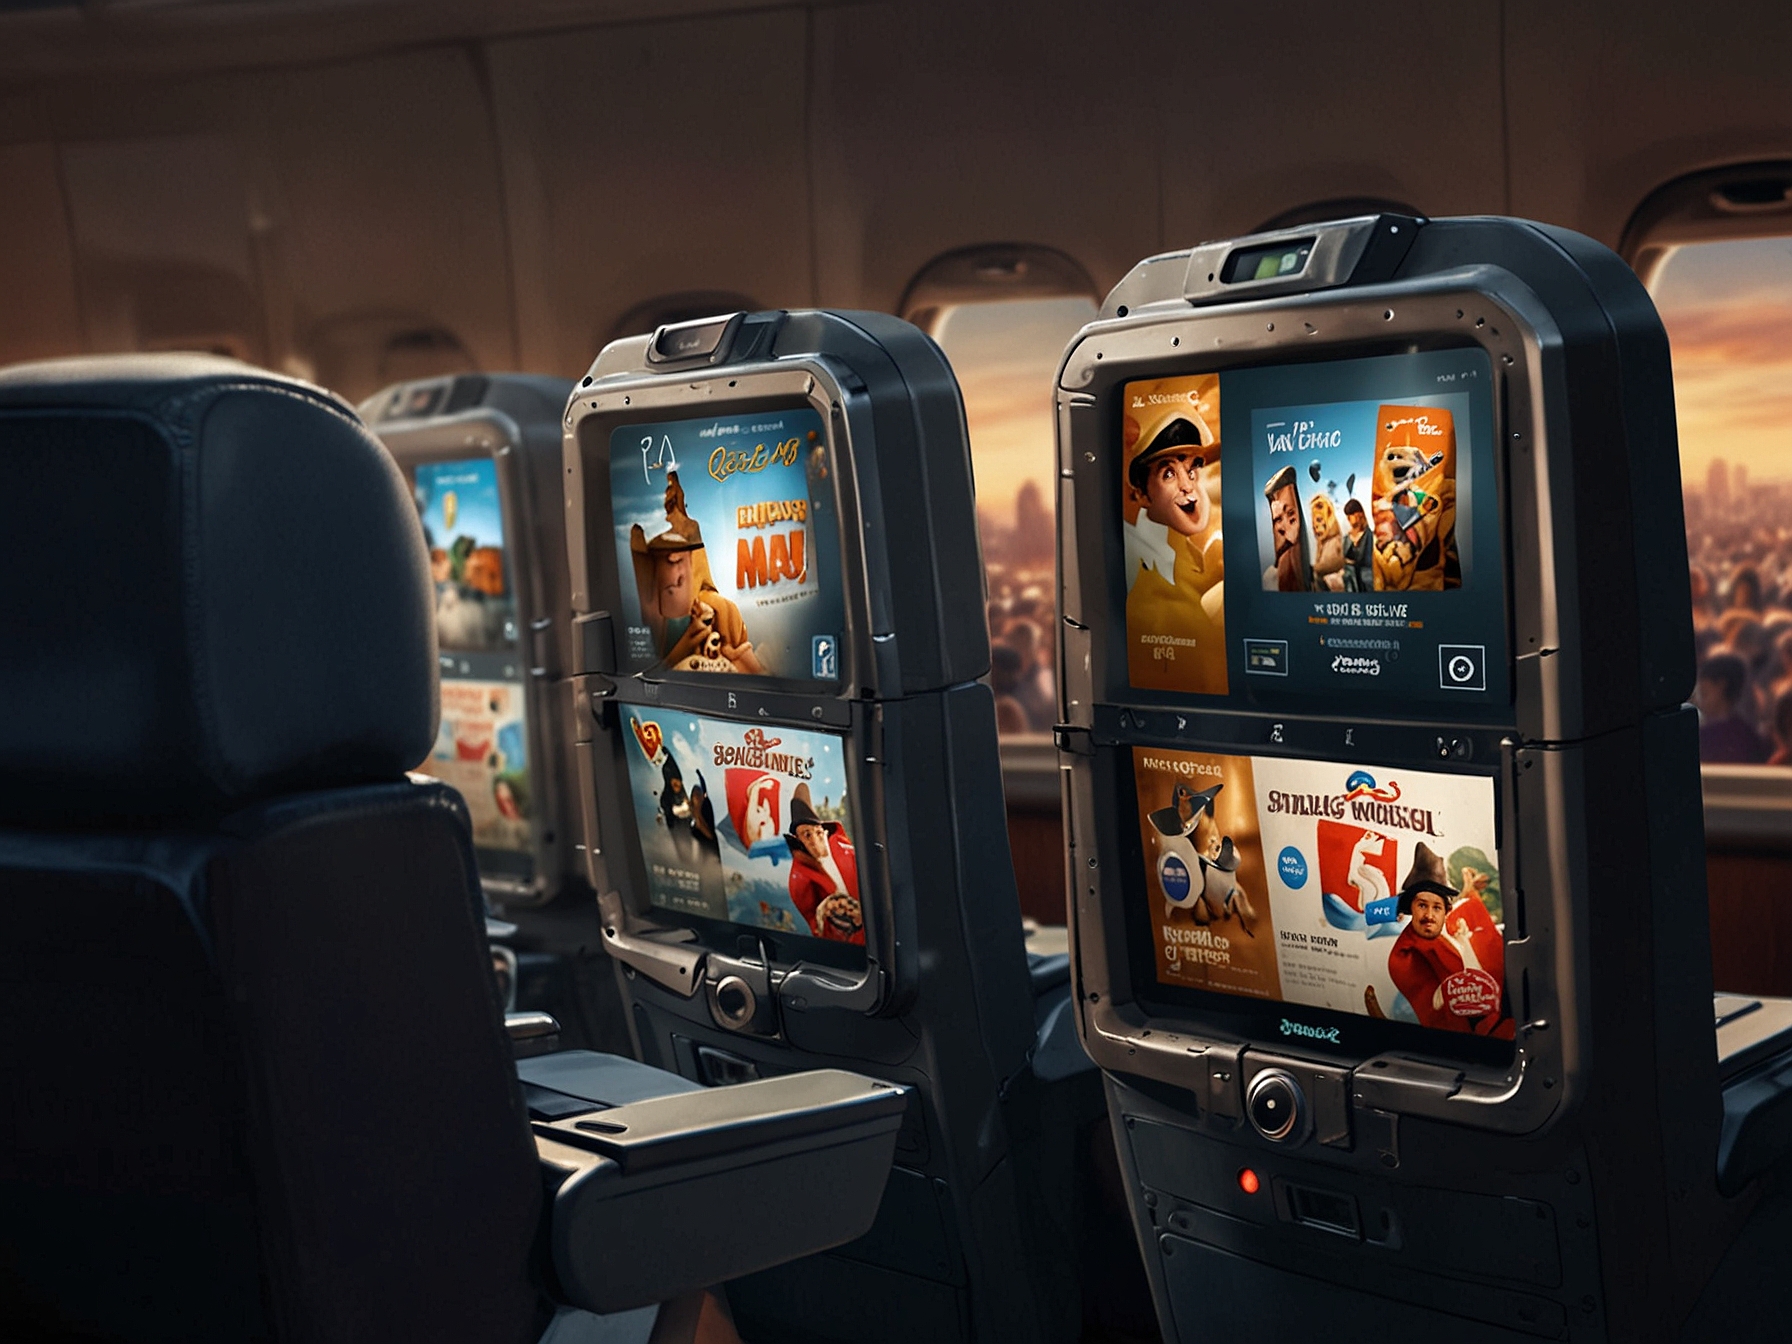 A close-up of an in-flight entertainment screen displaying targeted ads alongside the movie selection.